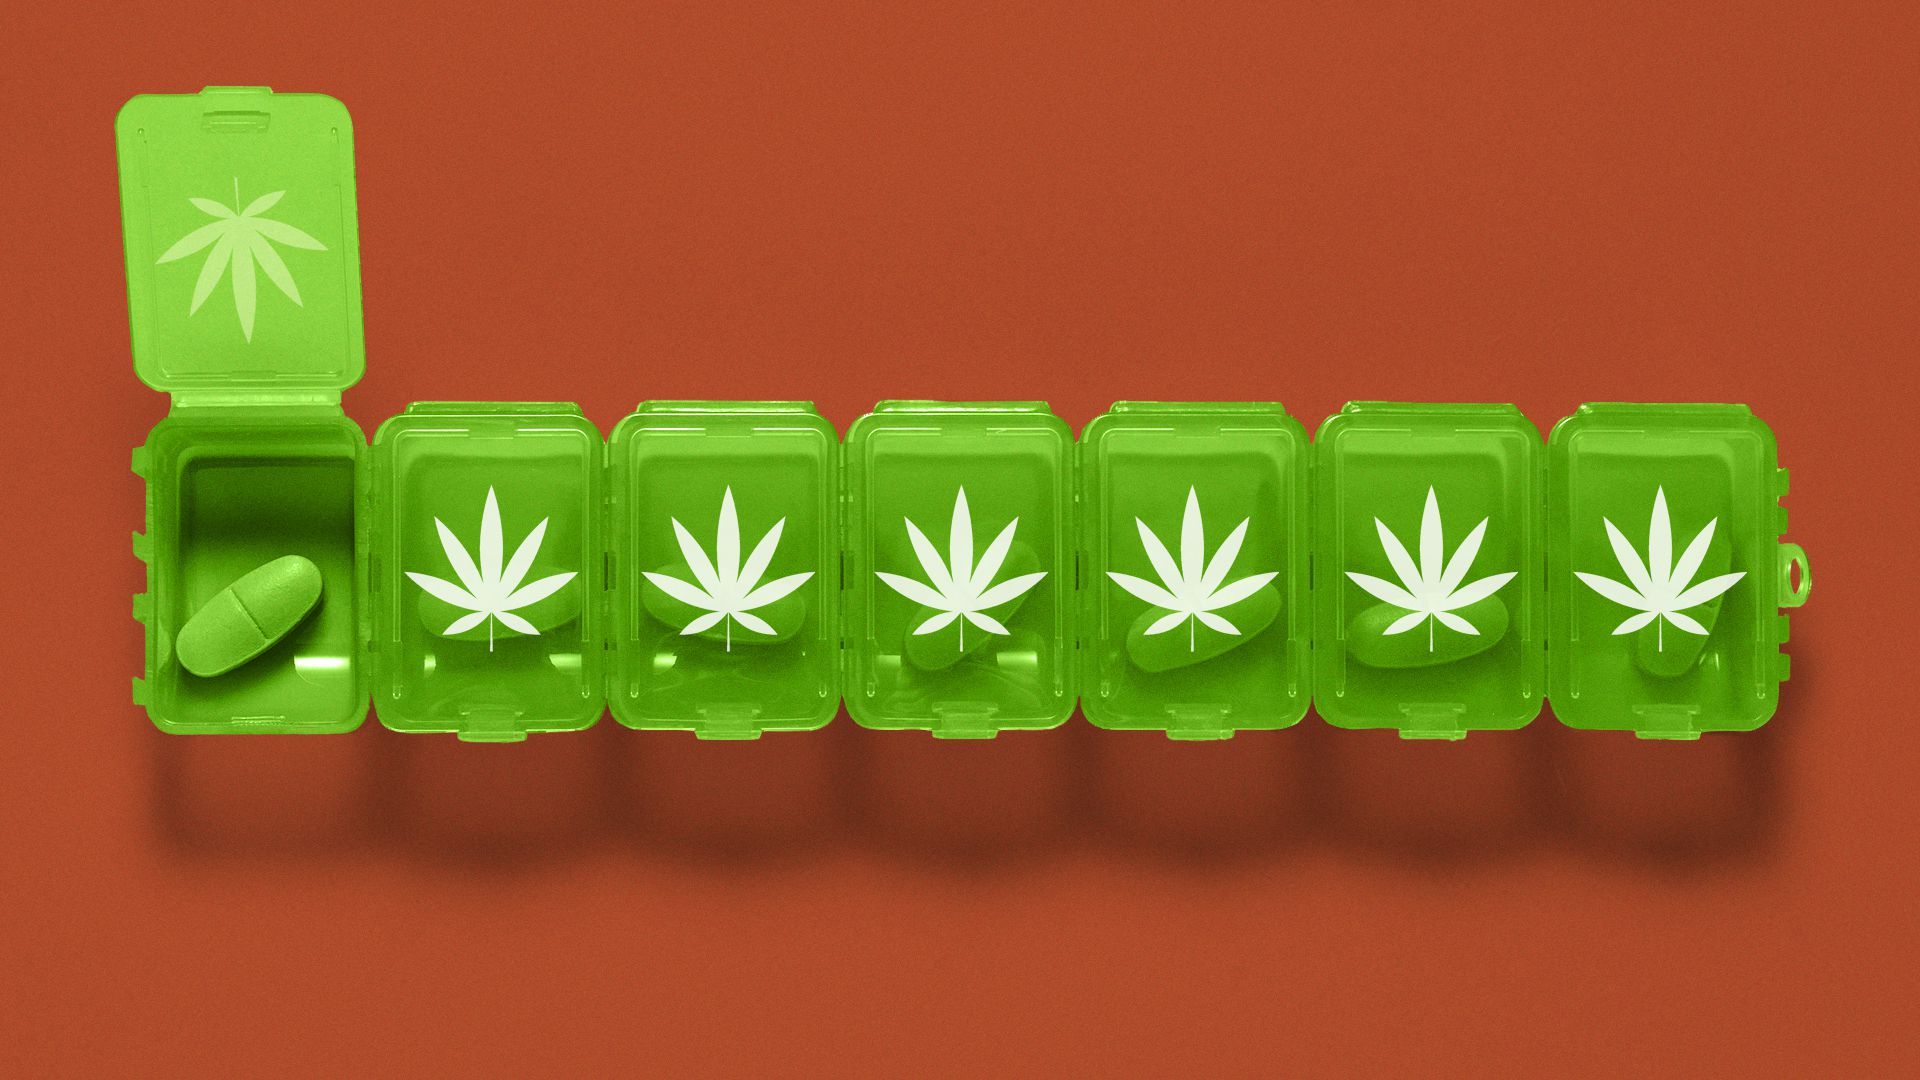 Illustration of weekly pill case with marijuana leaves labels.